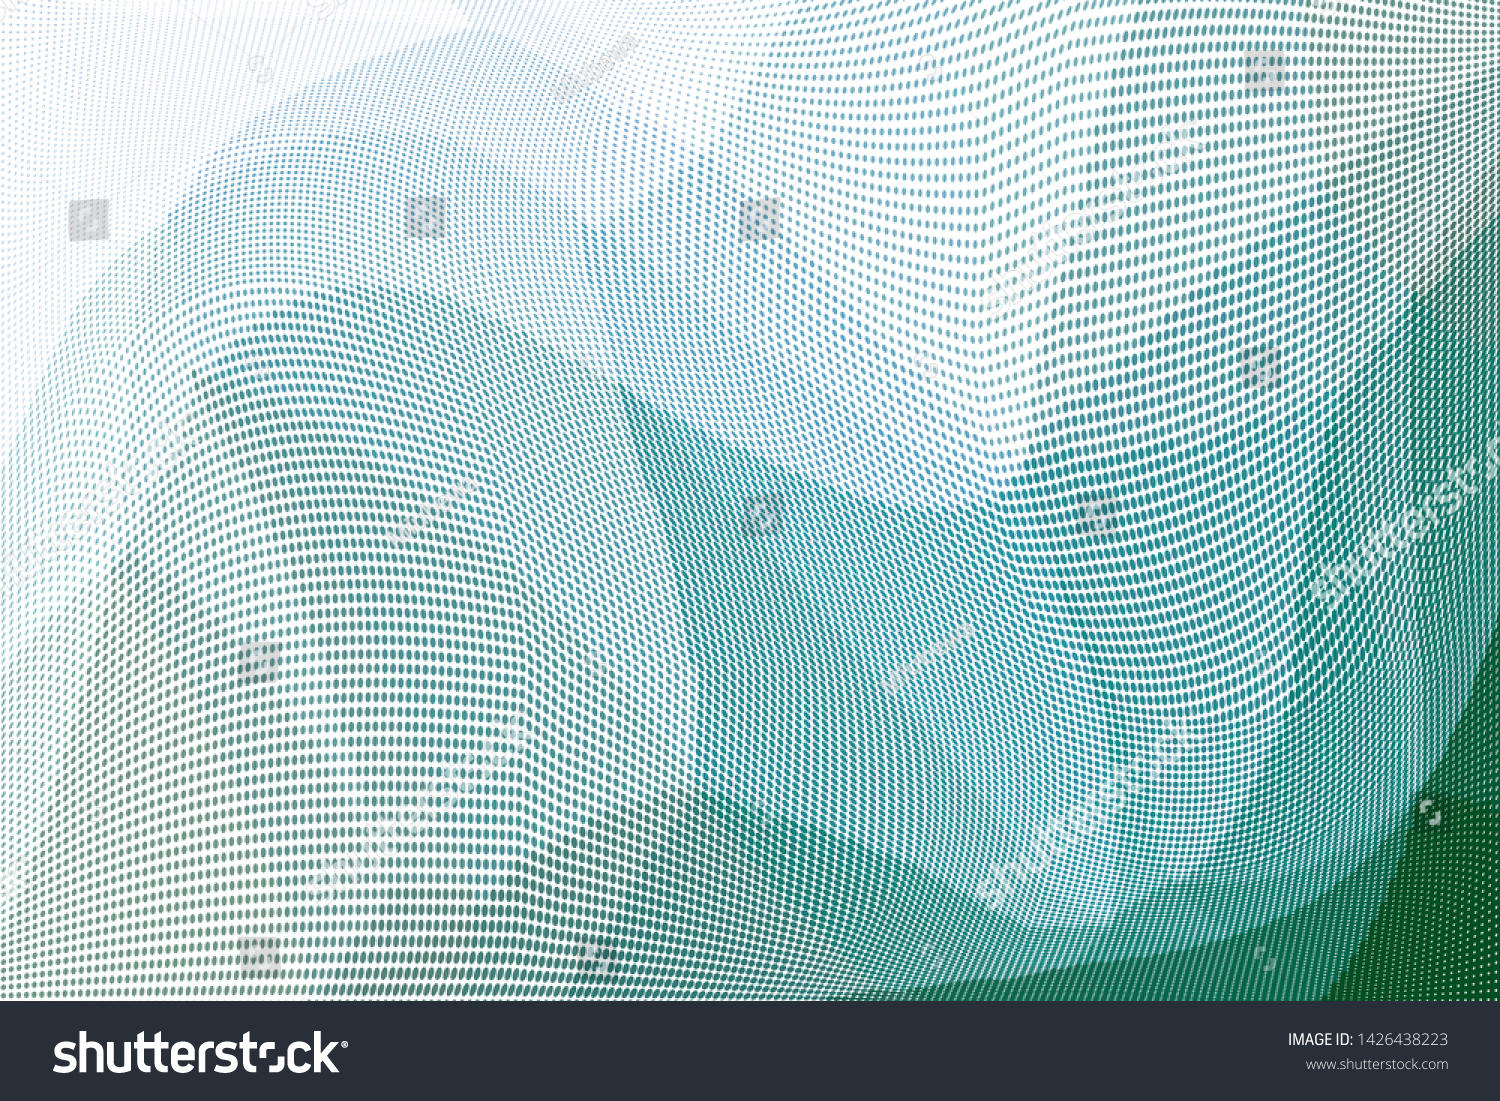 Grunge halftone dots pattern texture background. Low poly design. Modern gradient monochrome dotted vector illustration. Abstract wavy lines. Triangular polygon backdrop #1426438223